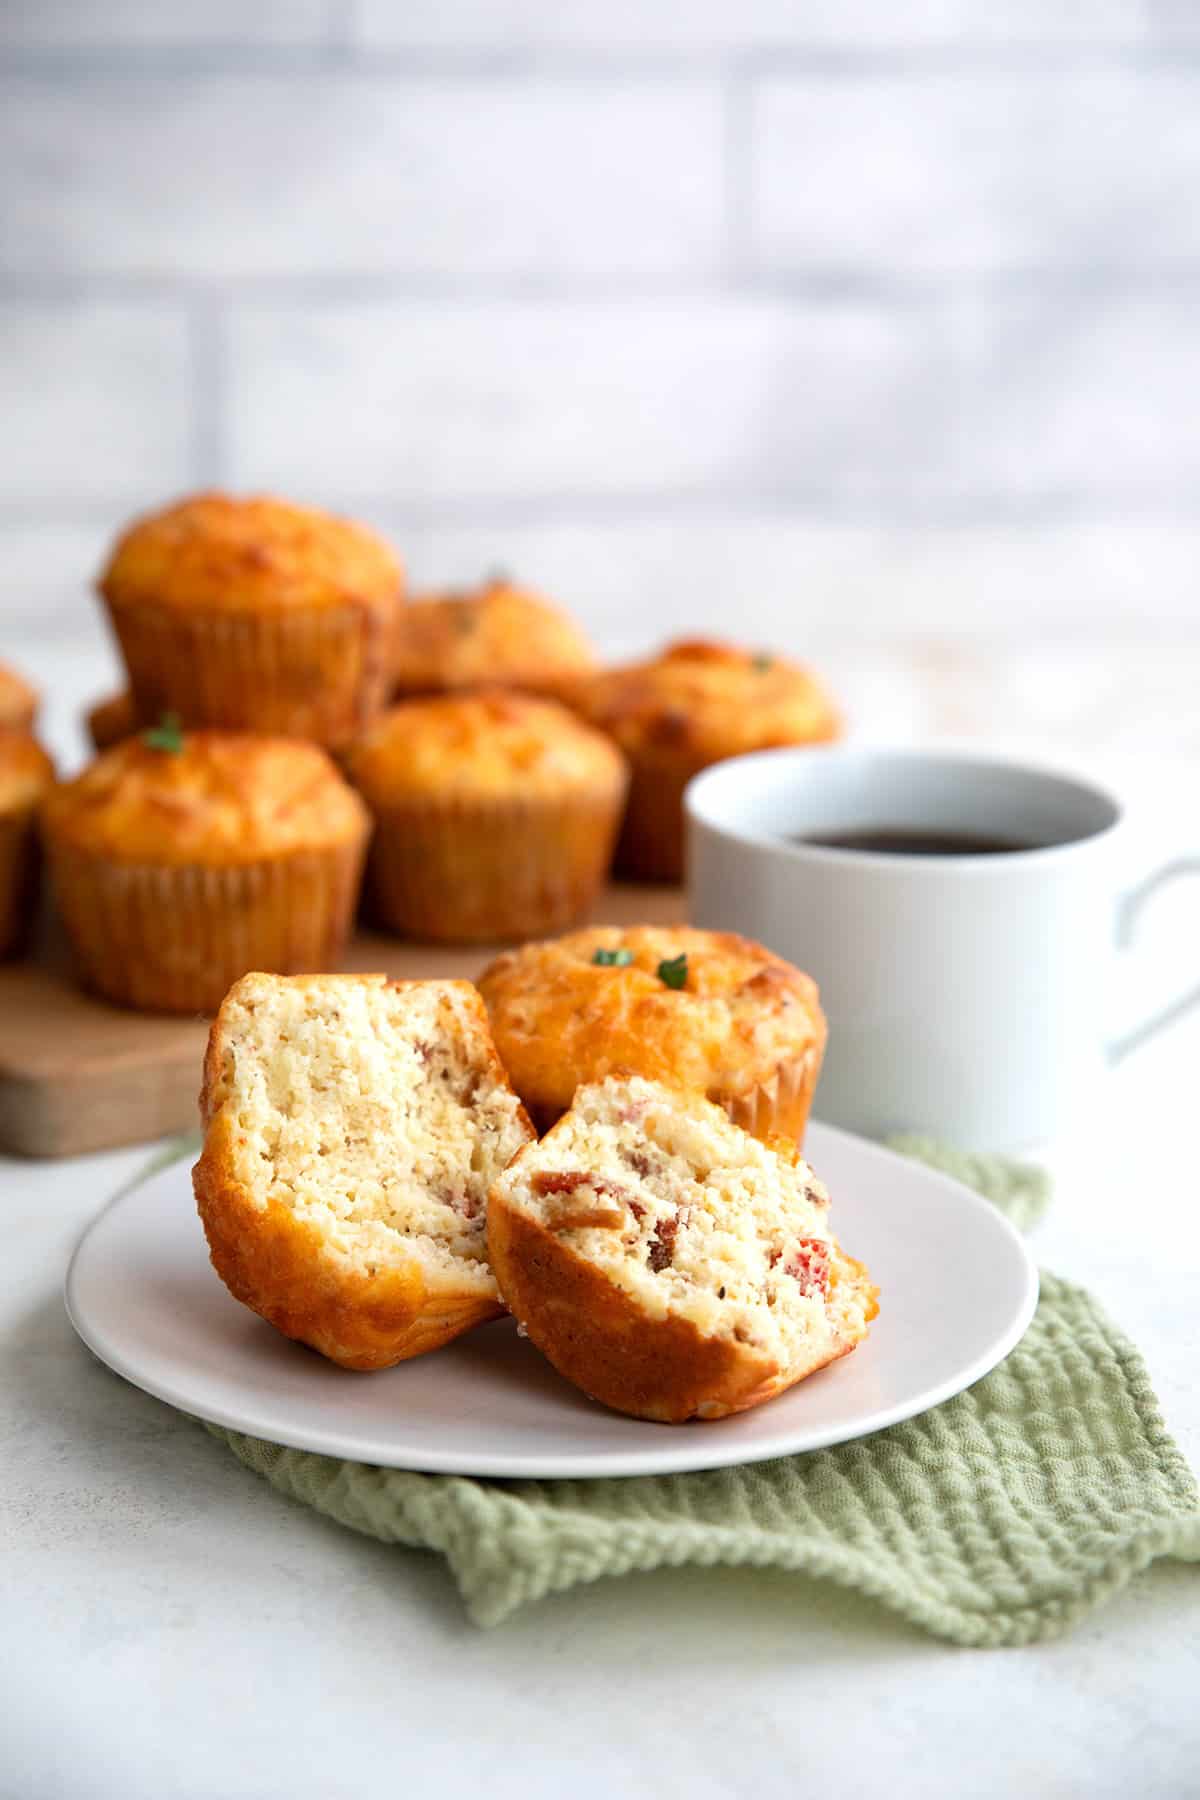 Savory cottage cheese muffins on a white plate over a green napkin, with a cup of coffee in the background.